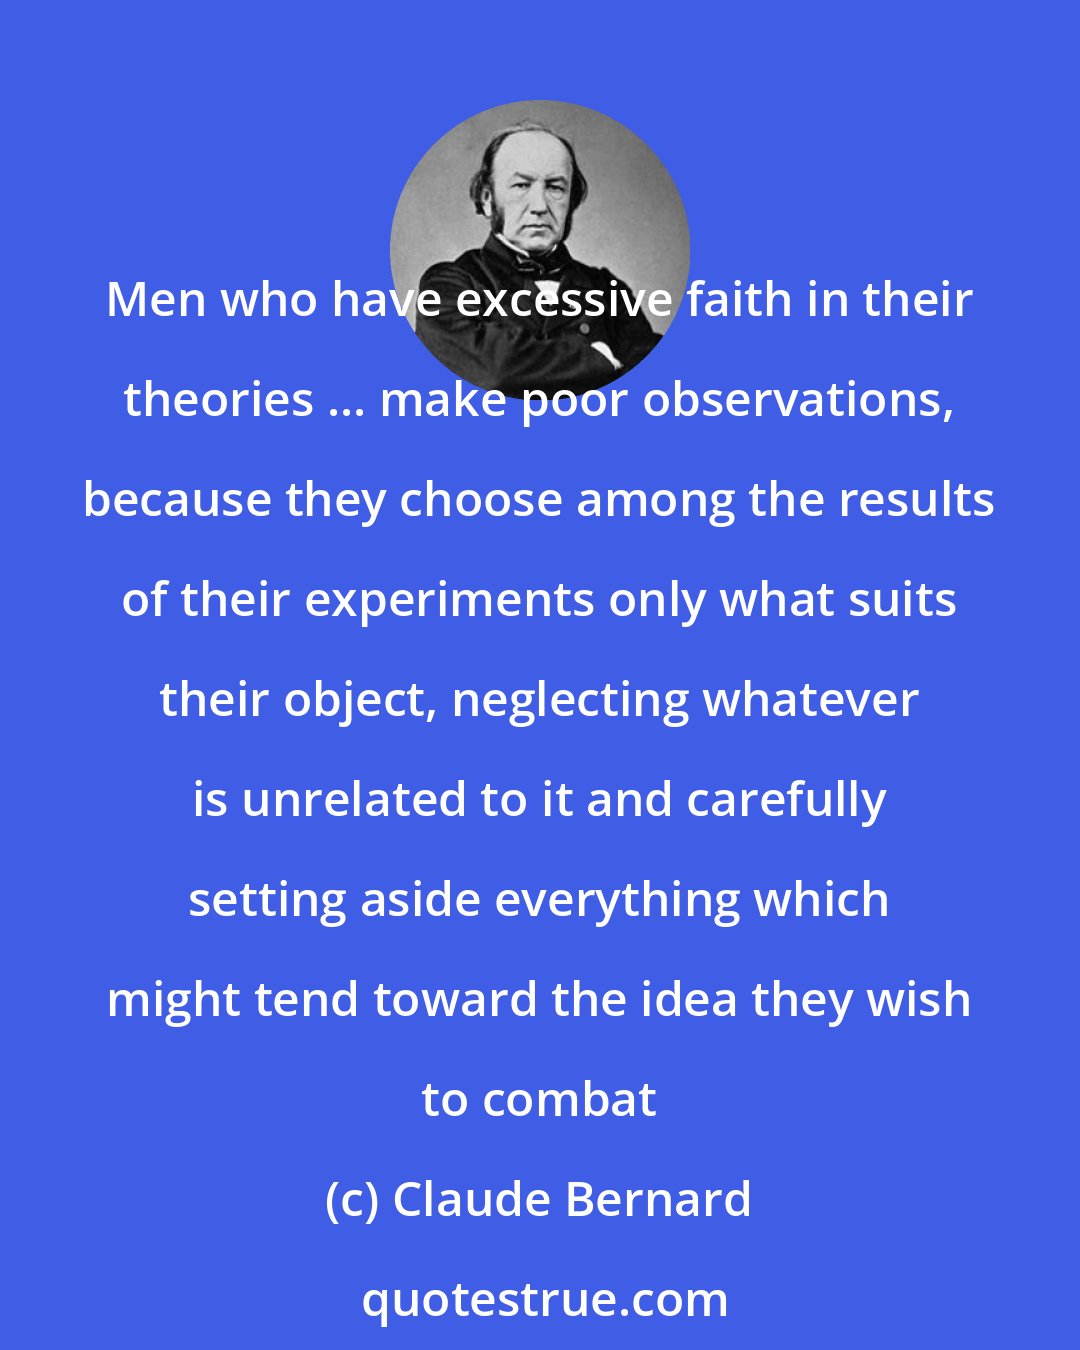 Claude Bernard: Men who have excessive faith in their theories ... make poor observations, because they choose among the results of their experiments only what suits their object, neglecting whatever is unrelated to it and carefully setting aside everything which might tend toward the idea they wish to combat